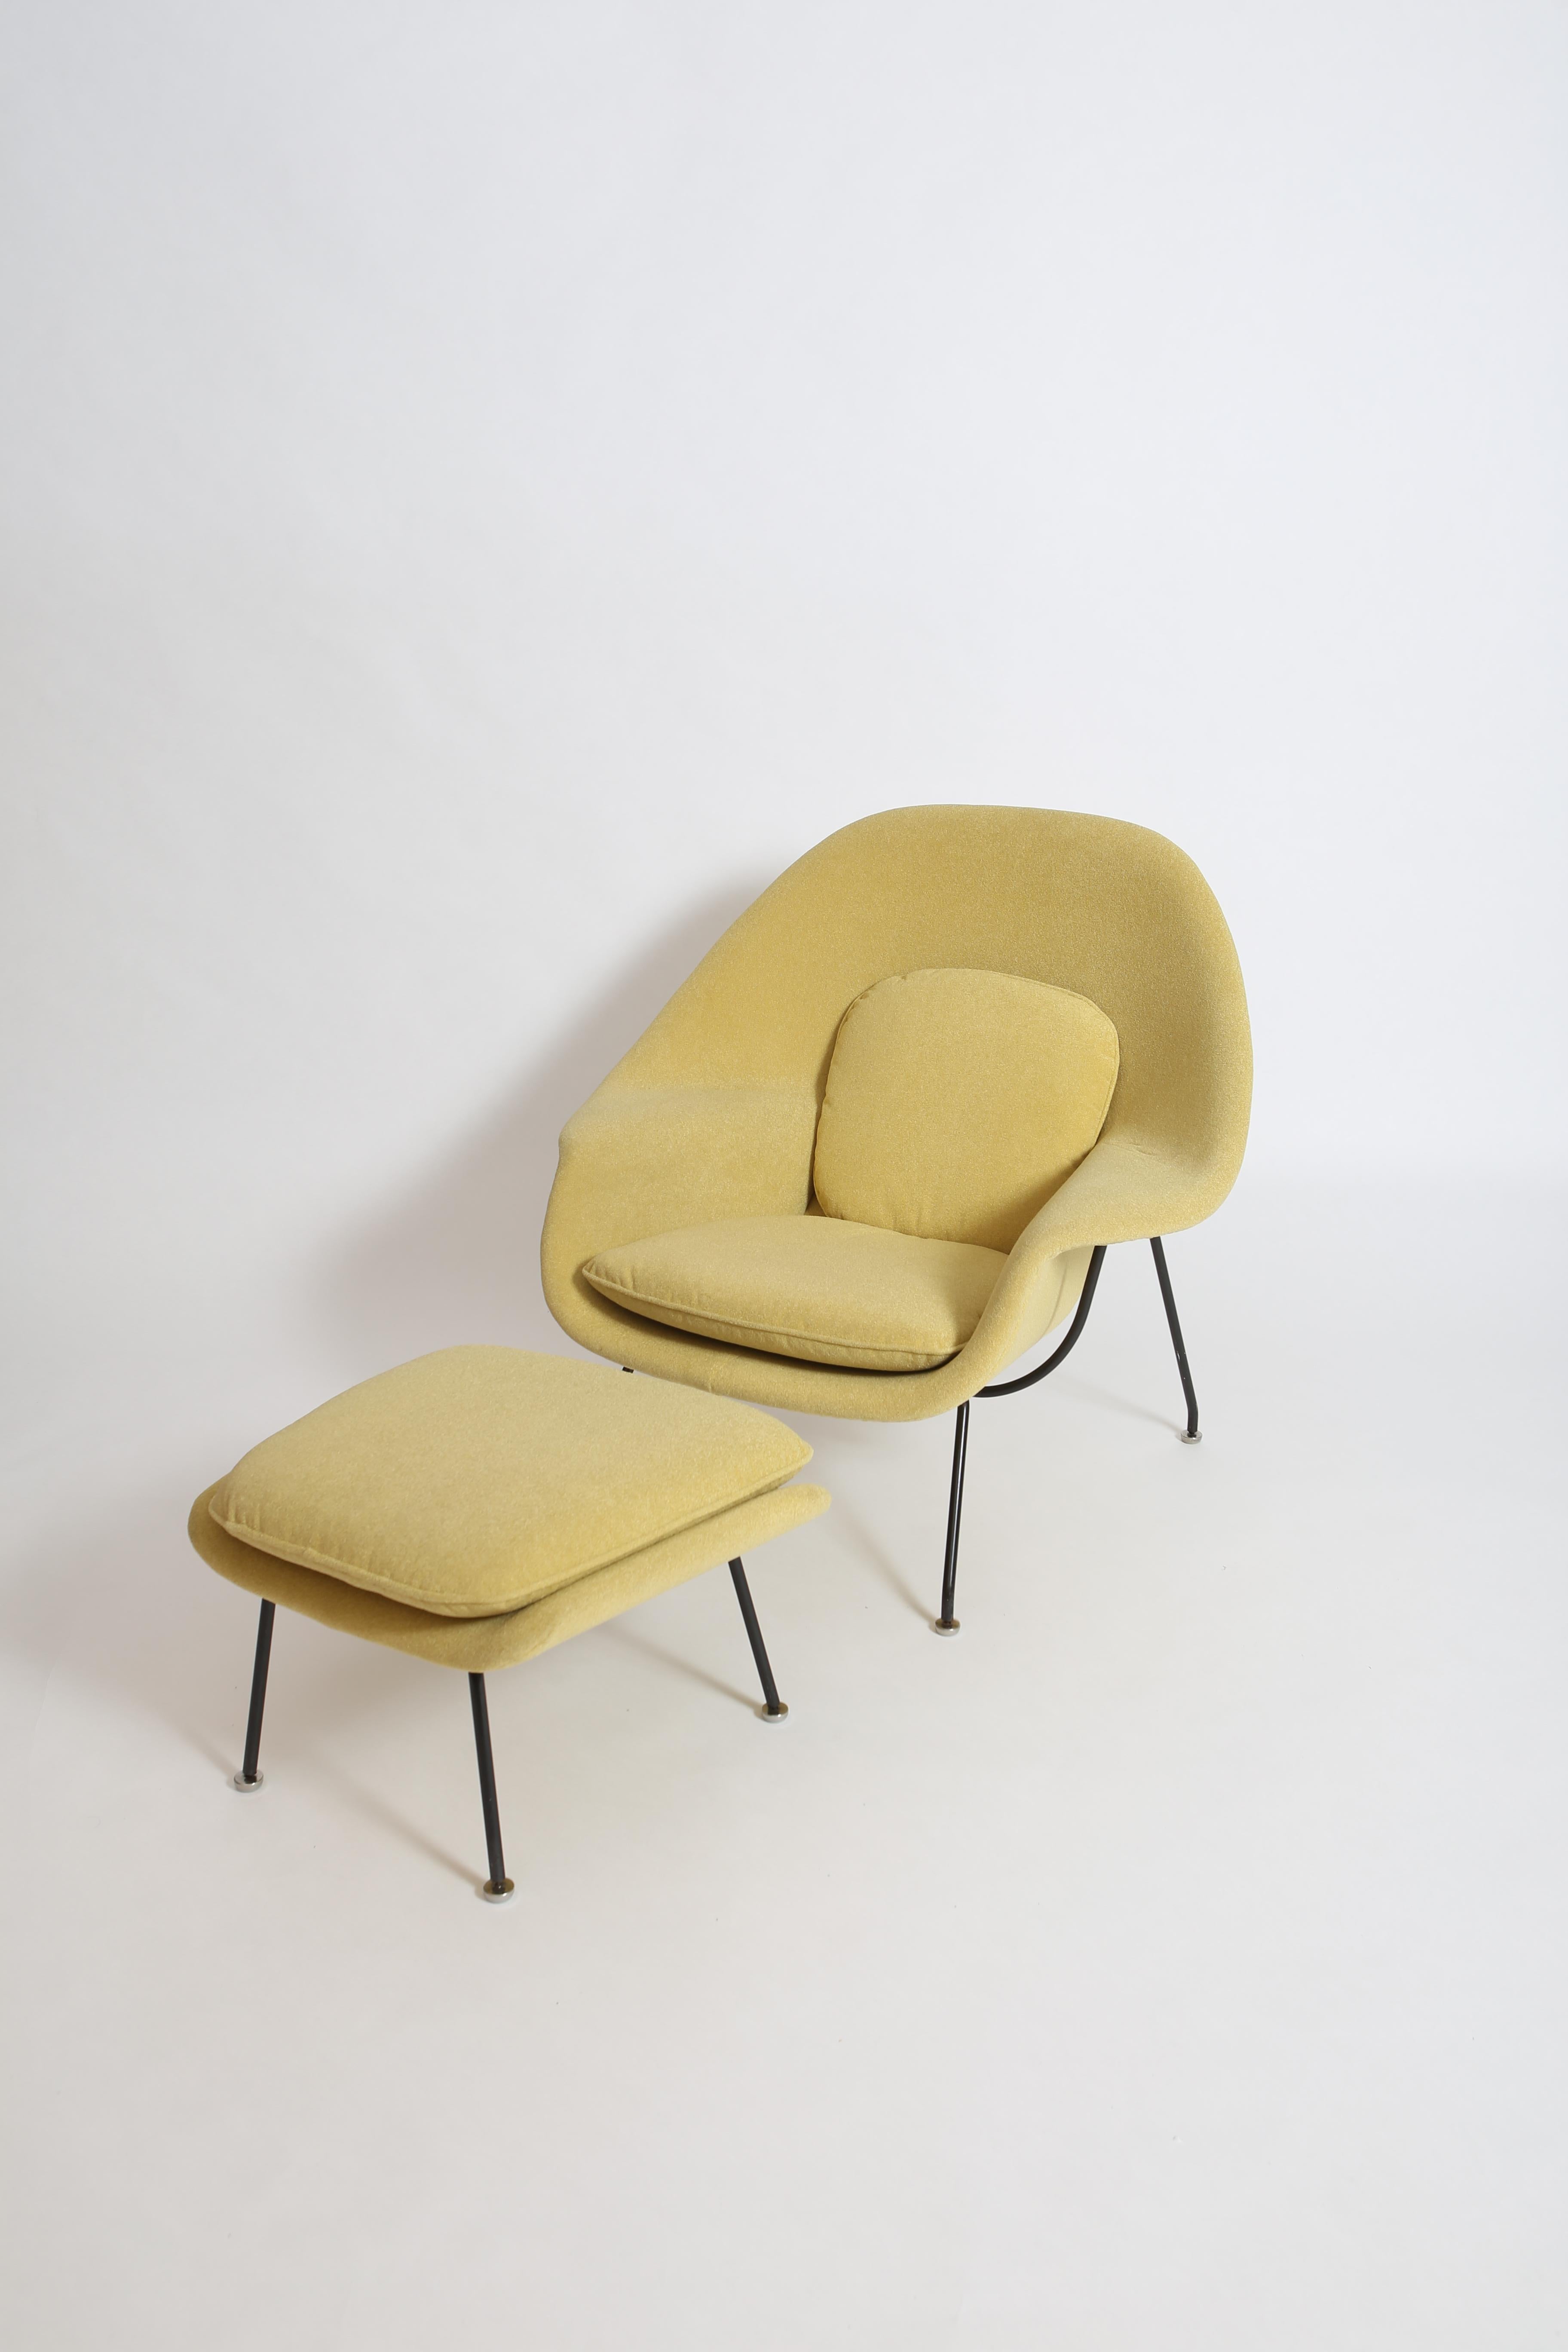 Classic “Womb Chair” and ottoman by Eero Saarinen for Knoll. This example dates to the early 1960s and has been recently reupholstered in a Knoll fabric. The color is a pale citron yellow. Early black steel frame shows age-appropriate wear, but